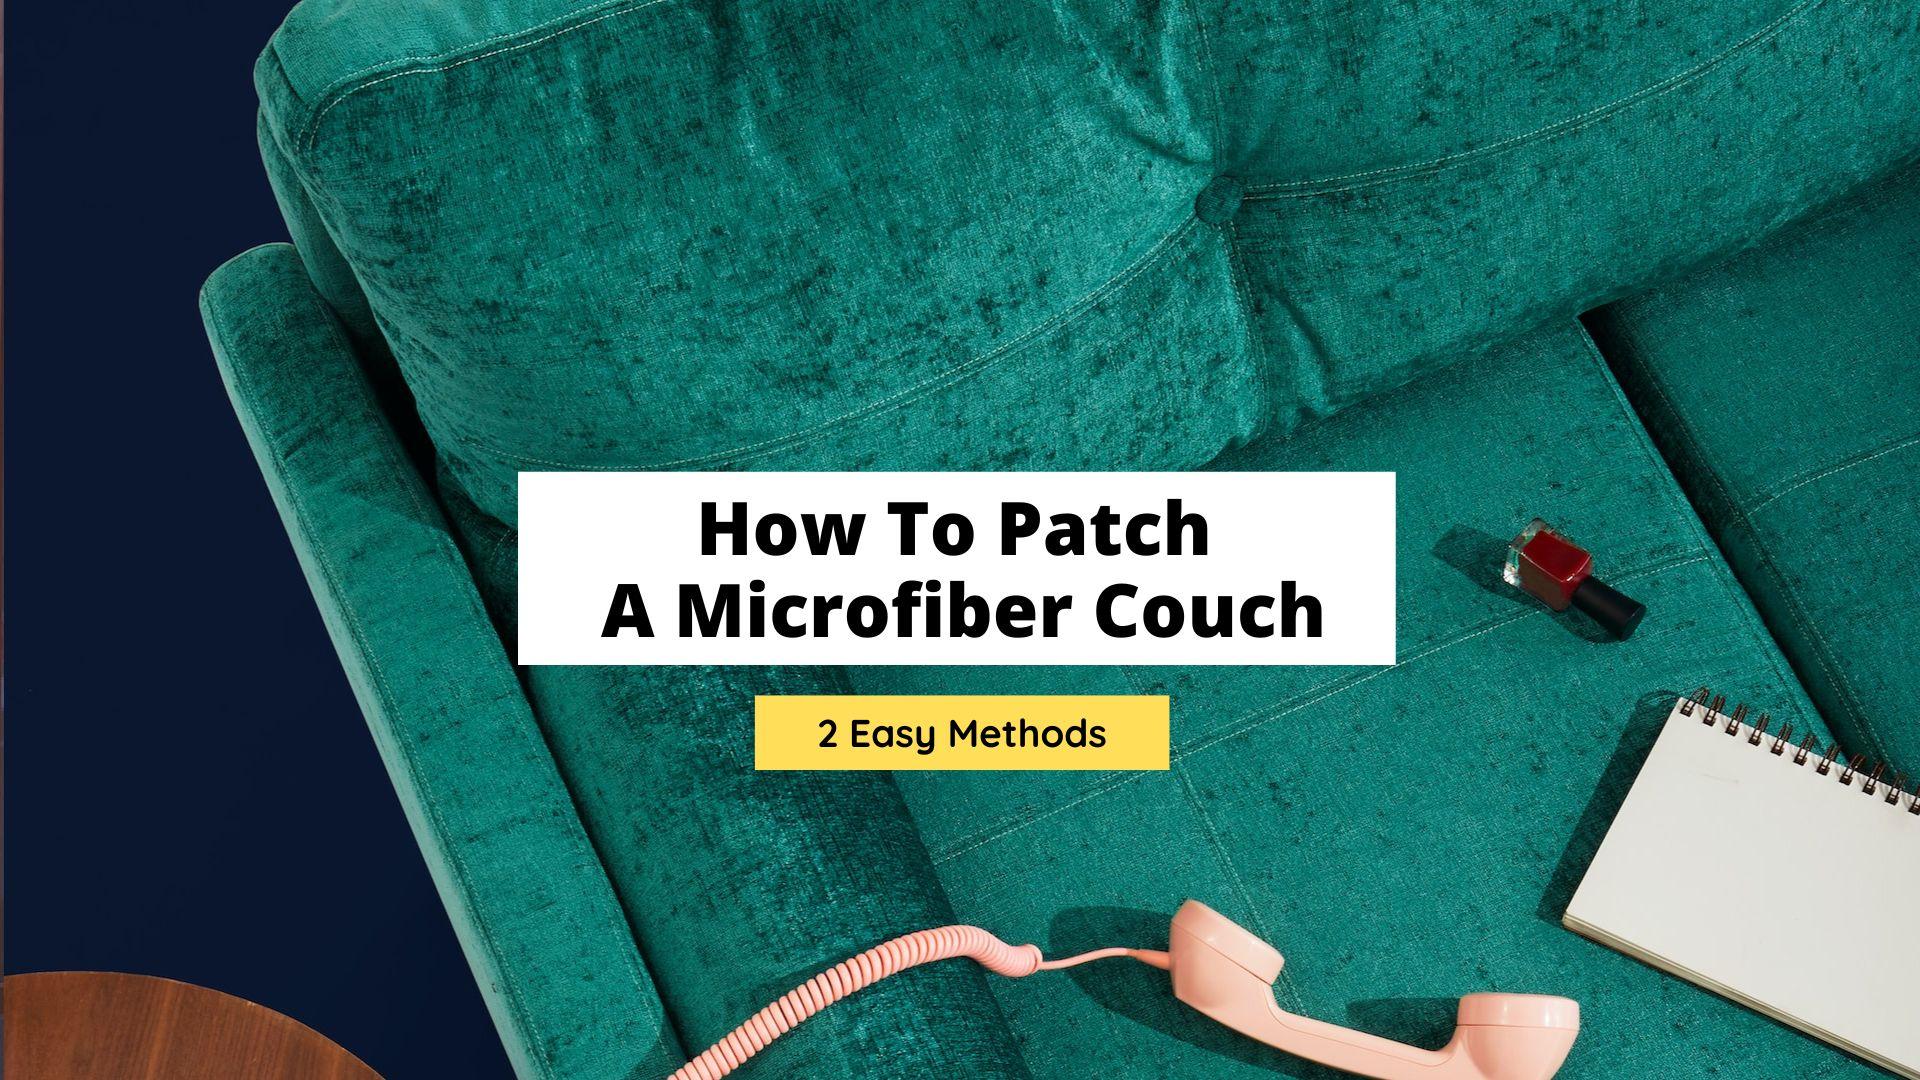 How To Patch A Microfiber Couch: 2 Easy Methods - Craftsonfire